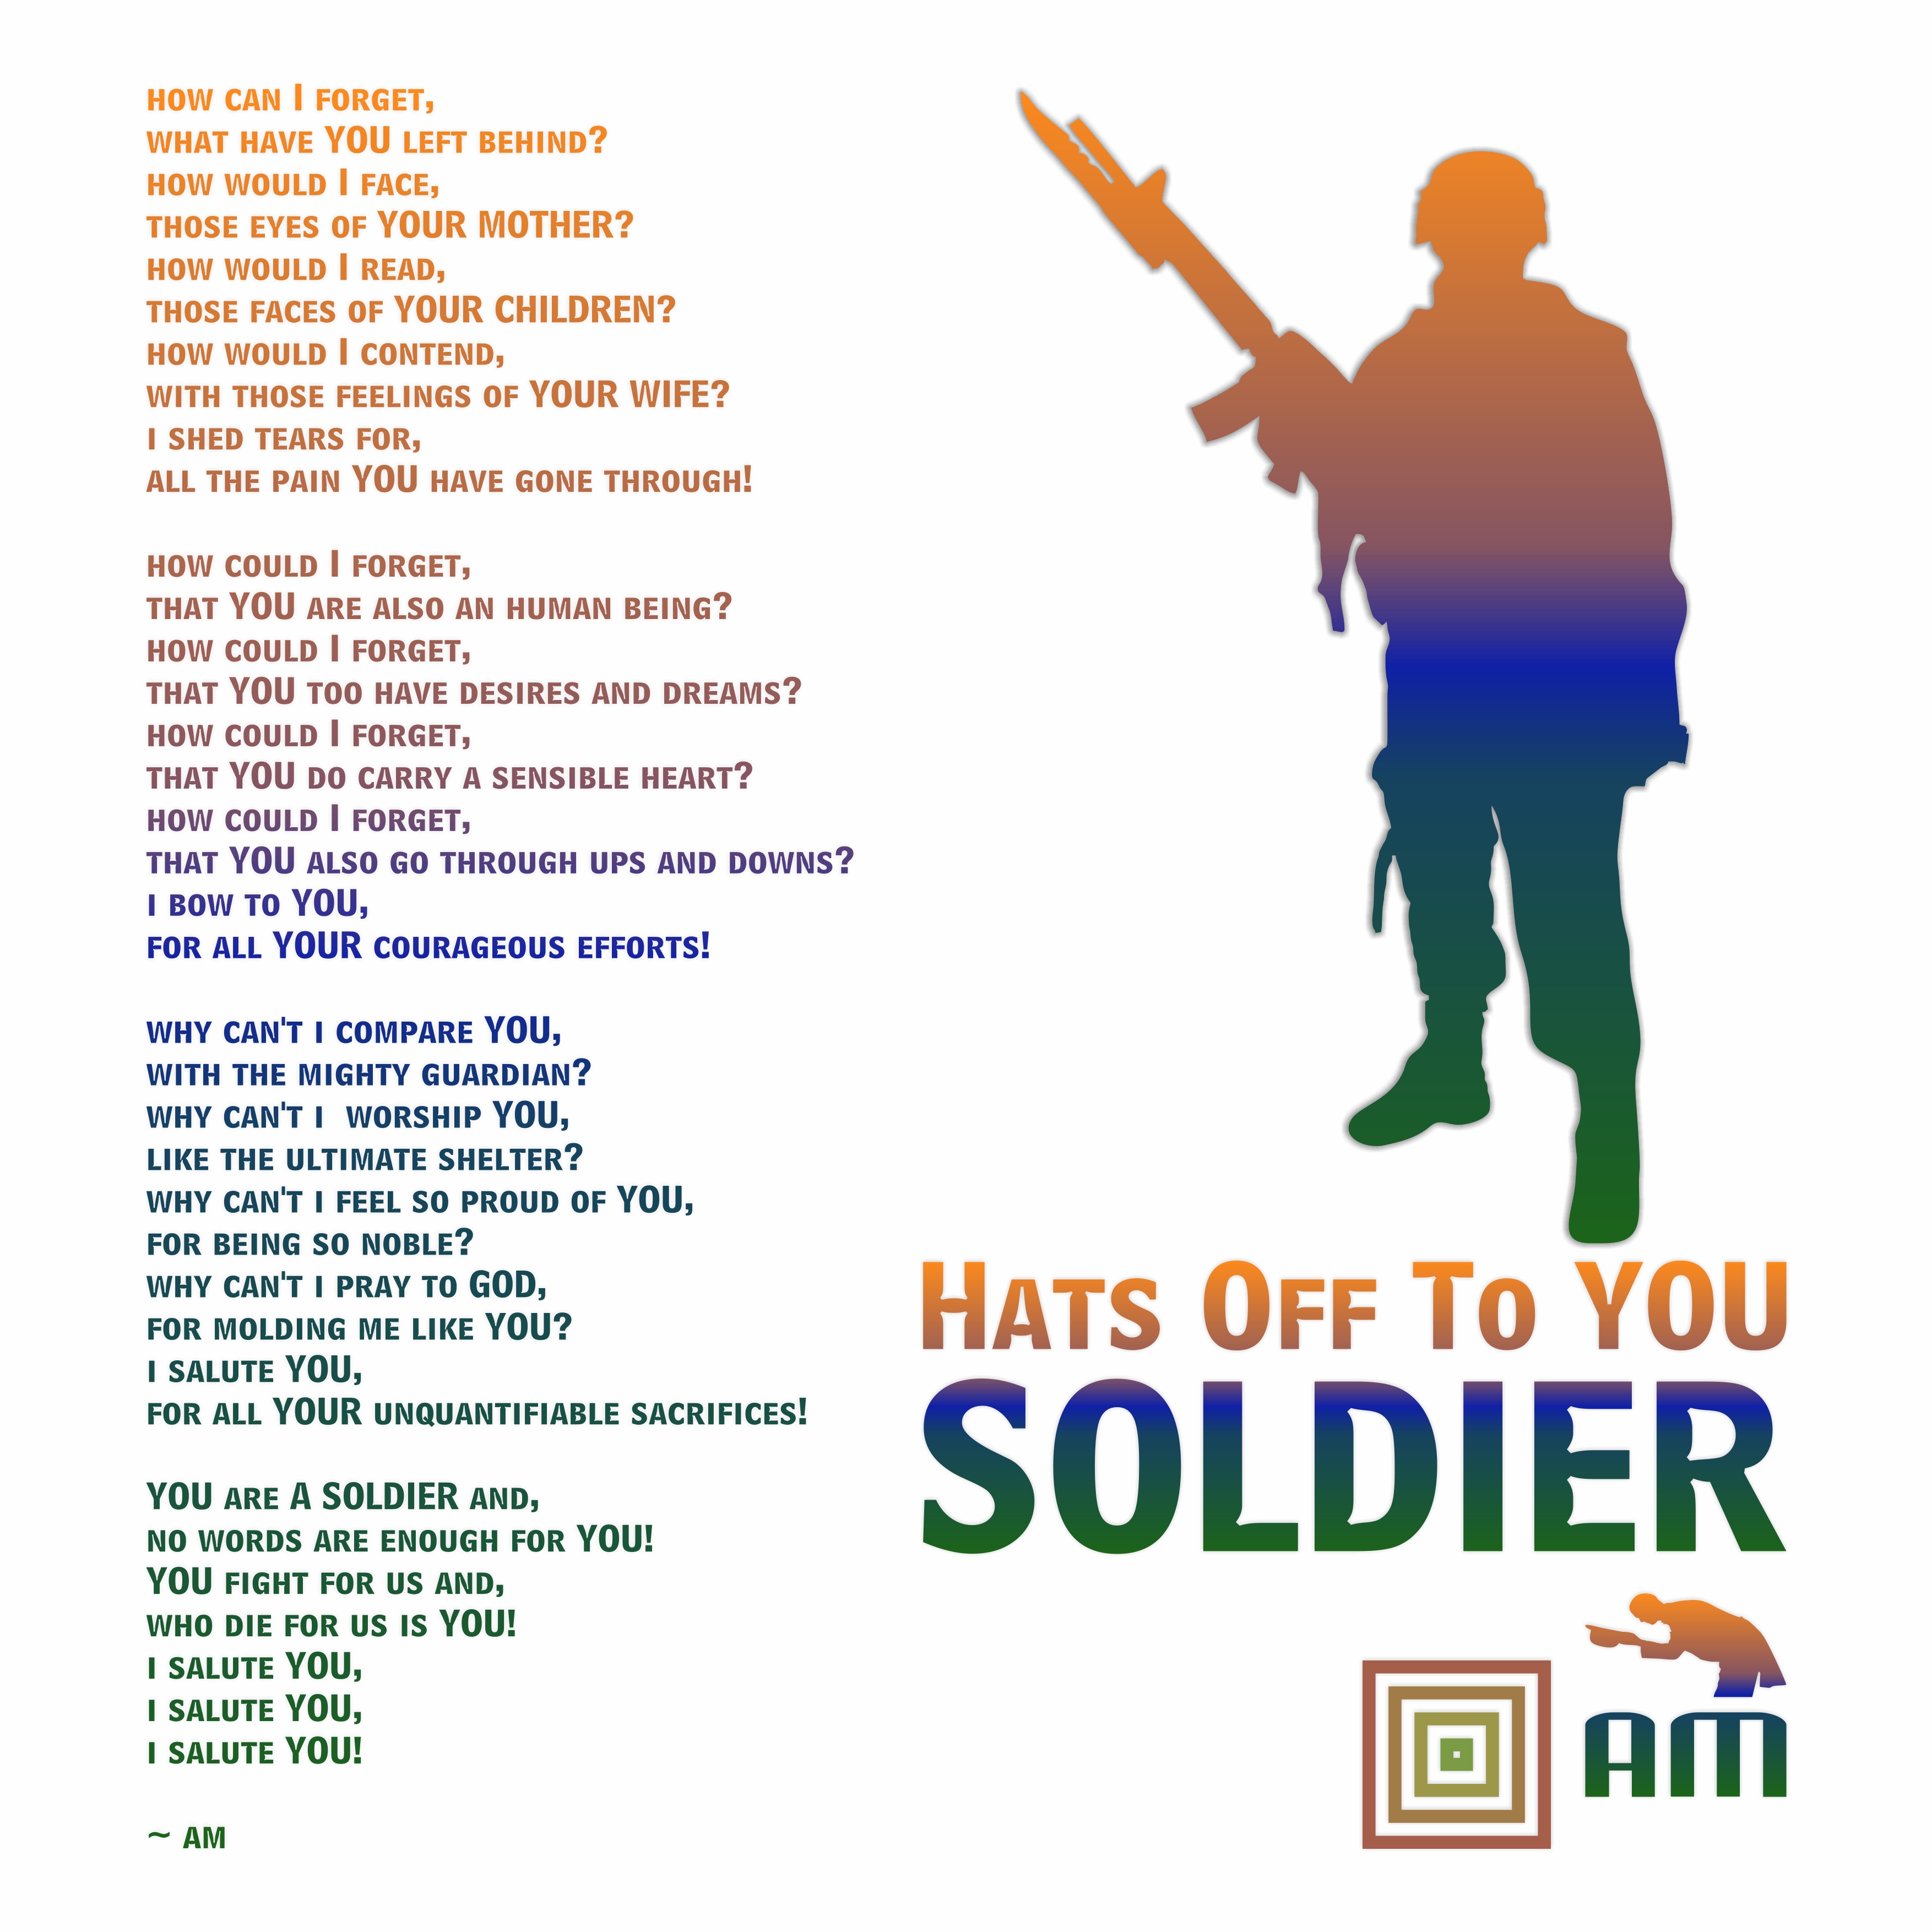 Soldier and give me salute